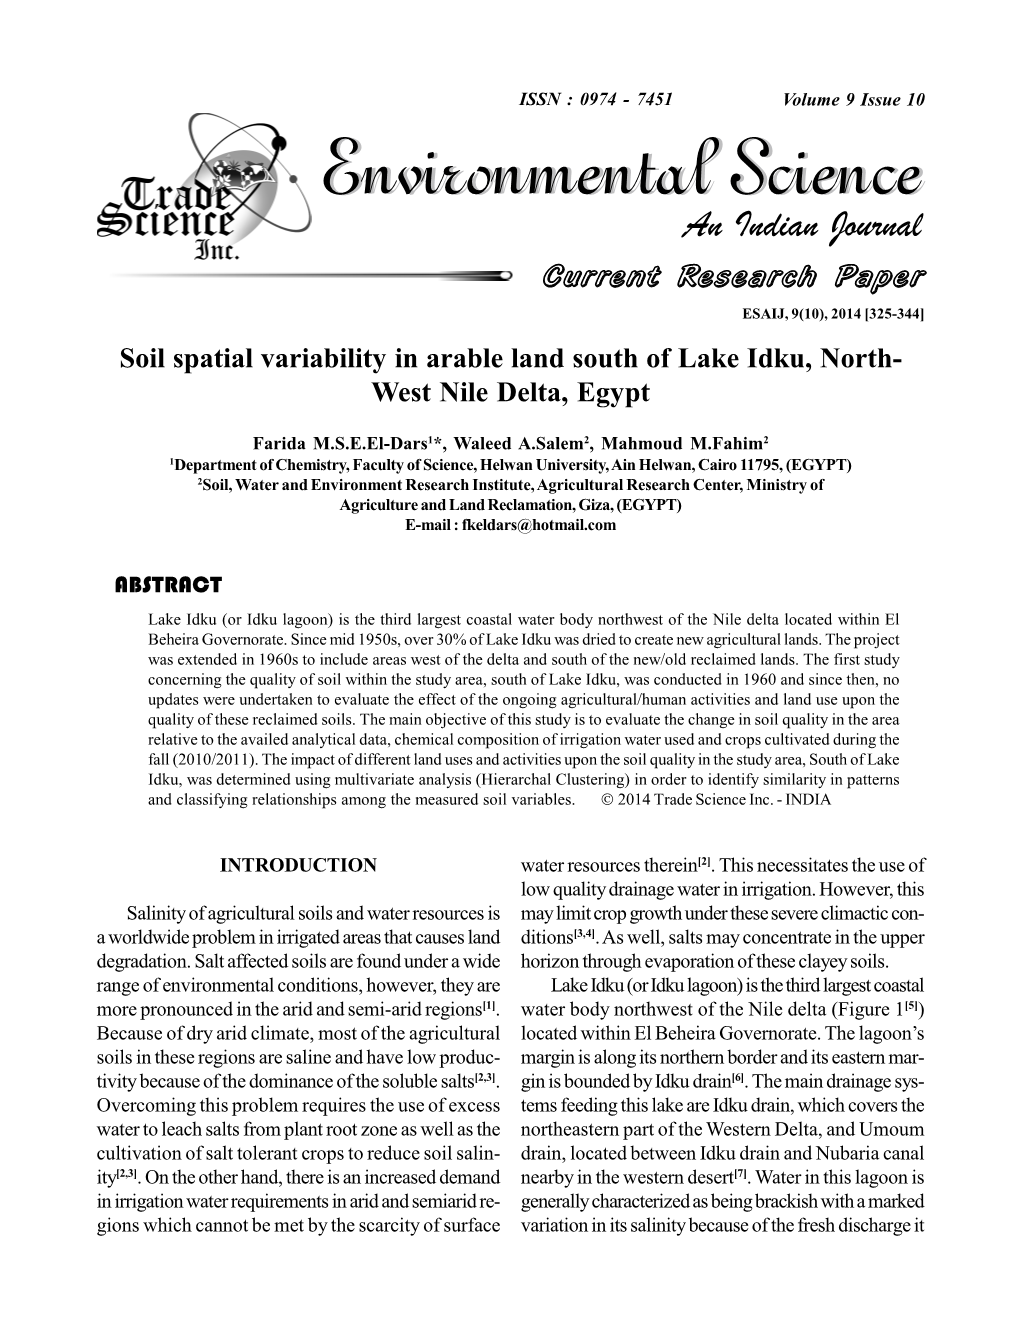 Soil Spatial Variability in Arable Land South of Lake Idku, North-West Nile